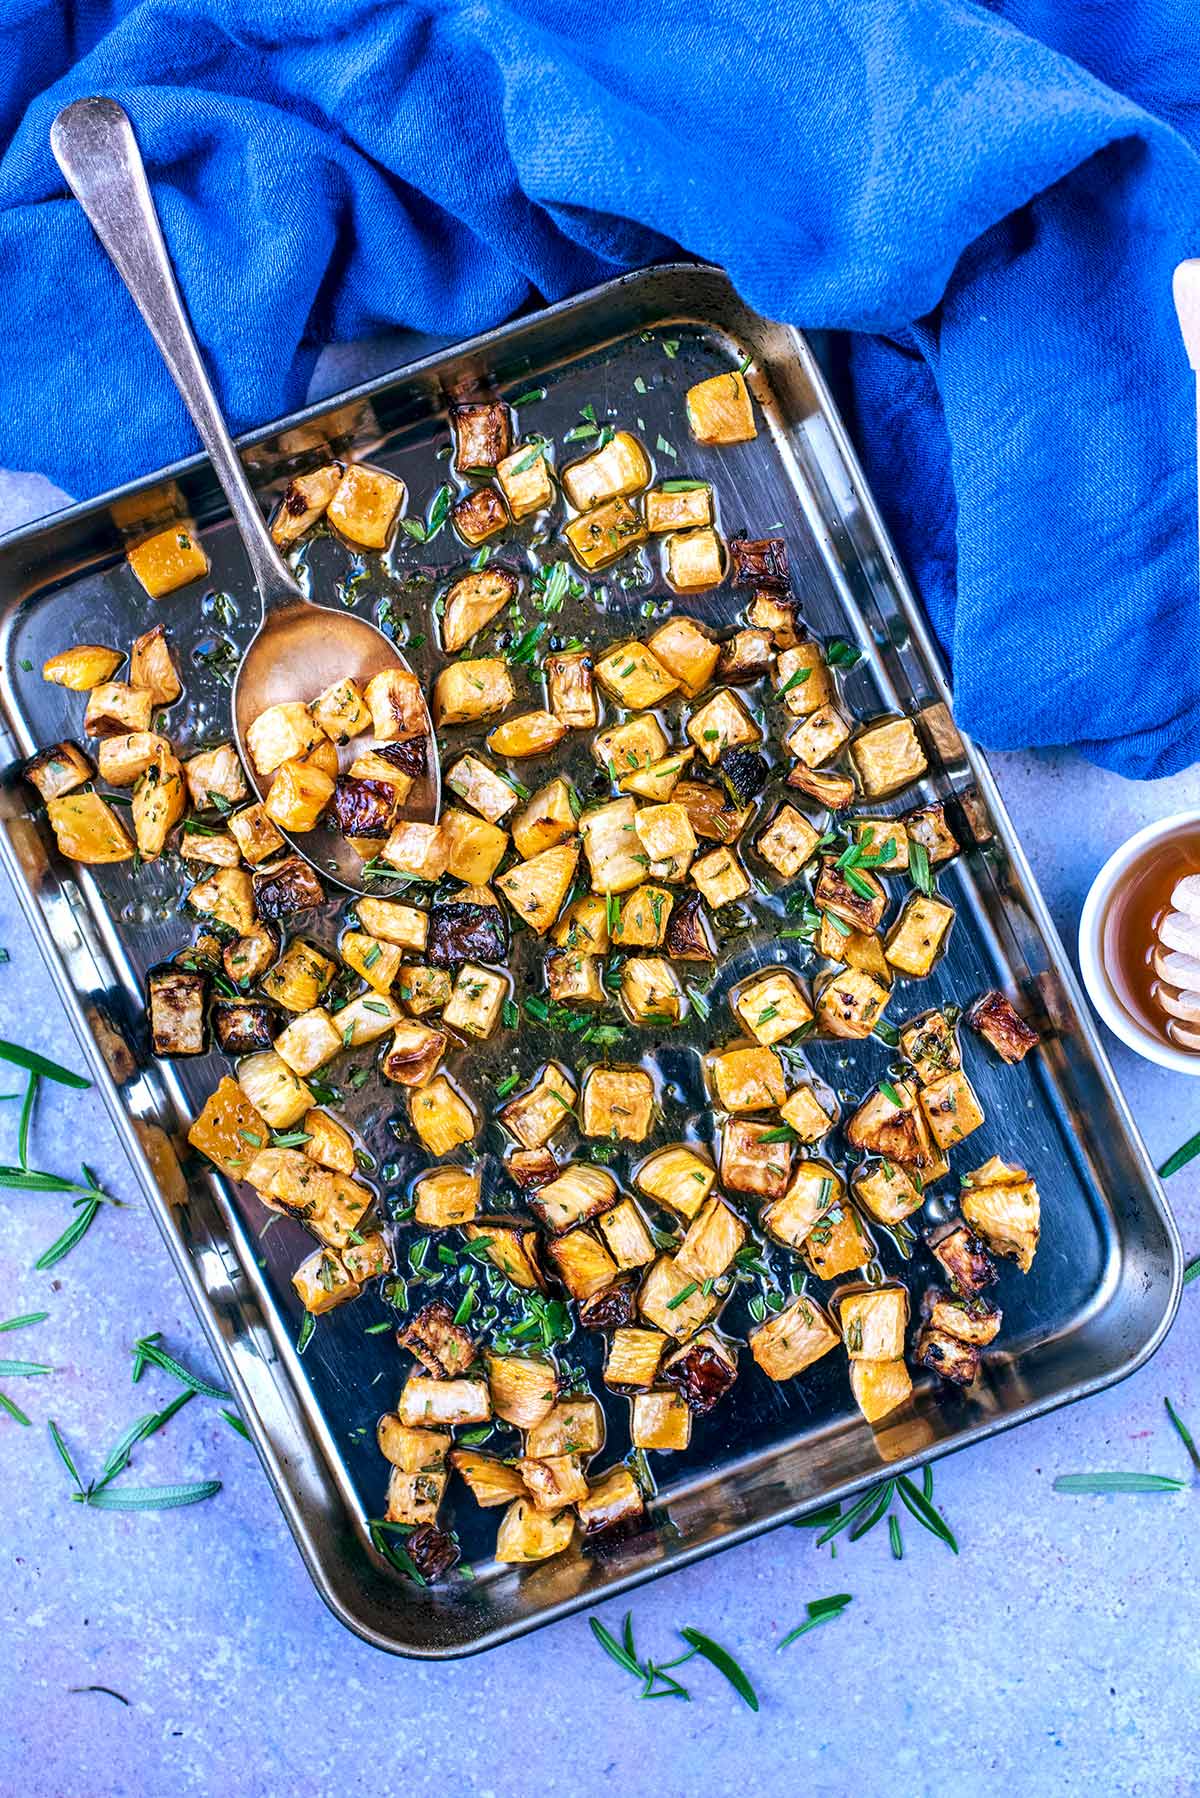 Small cubes of roast swede on a baking tray.